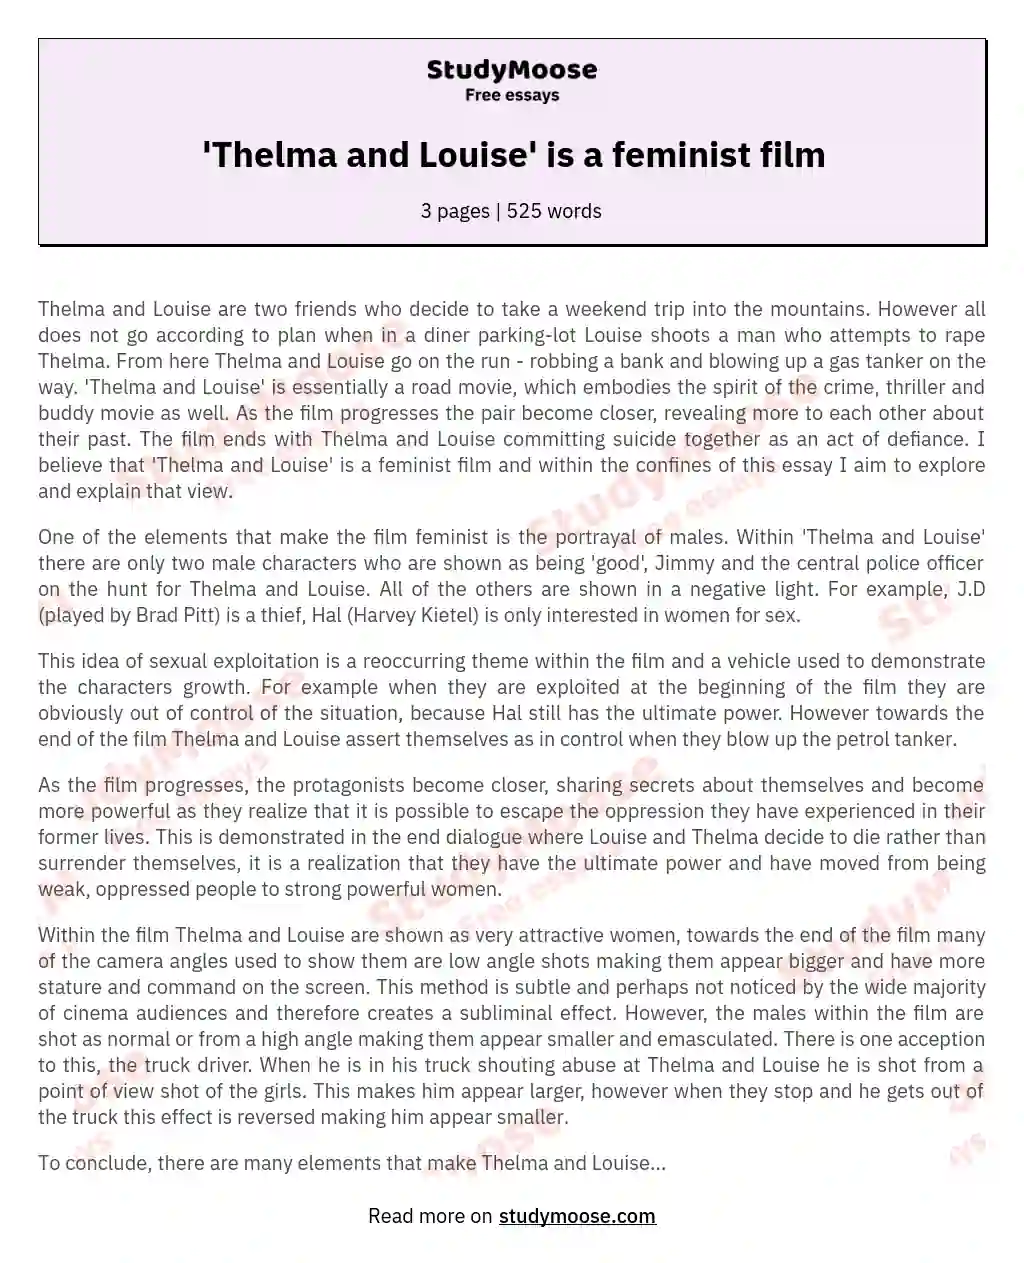 'Thelma and Louise' is a feminist film essay